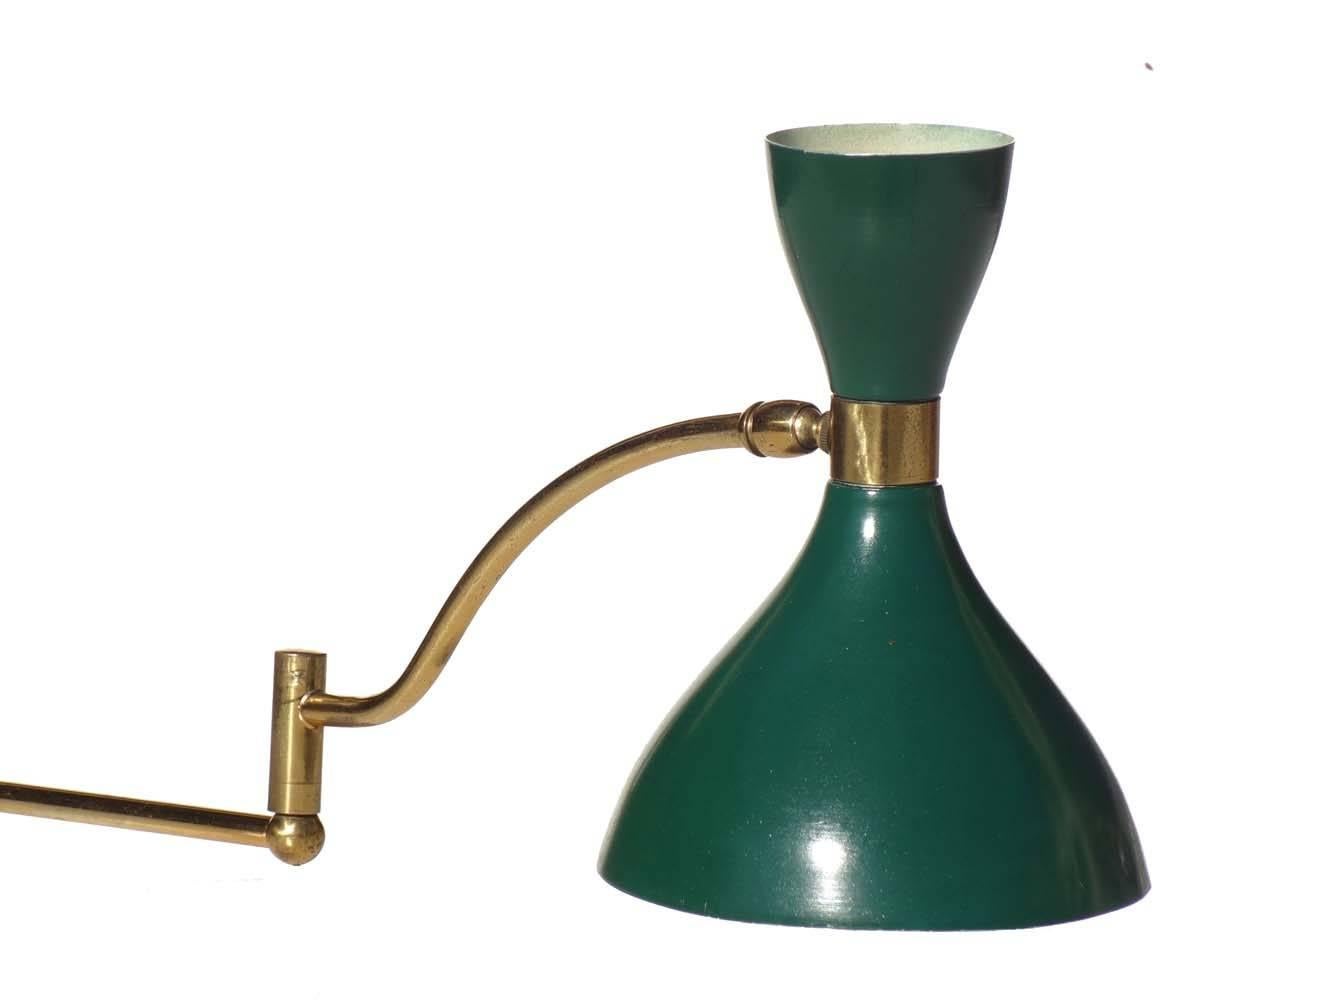 Adjustable wall lamp
by Stilnovo
Italy, 1950s

Green and ivory aluminum shade
Polish brass frame

Excellent condition.
Original 1950s.
 